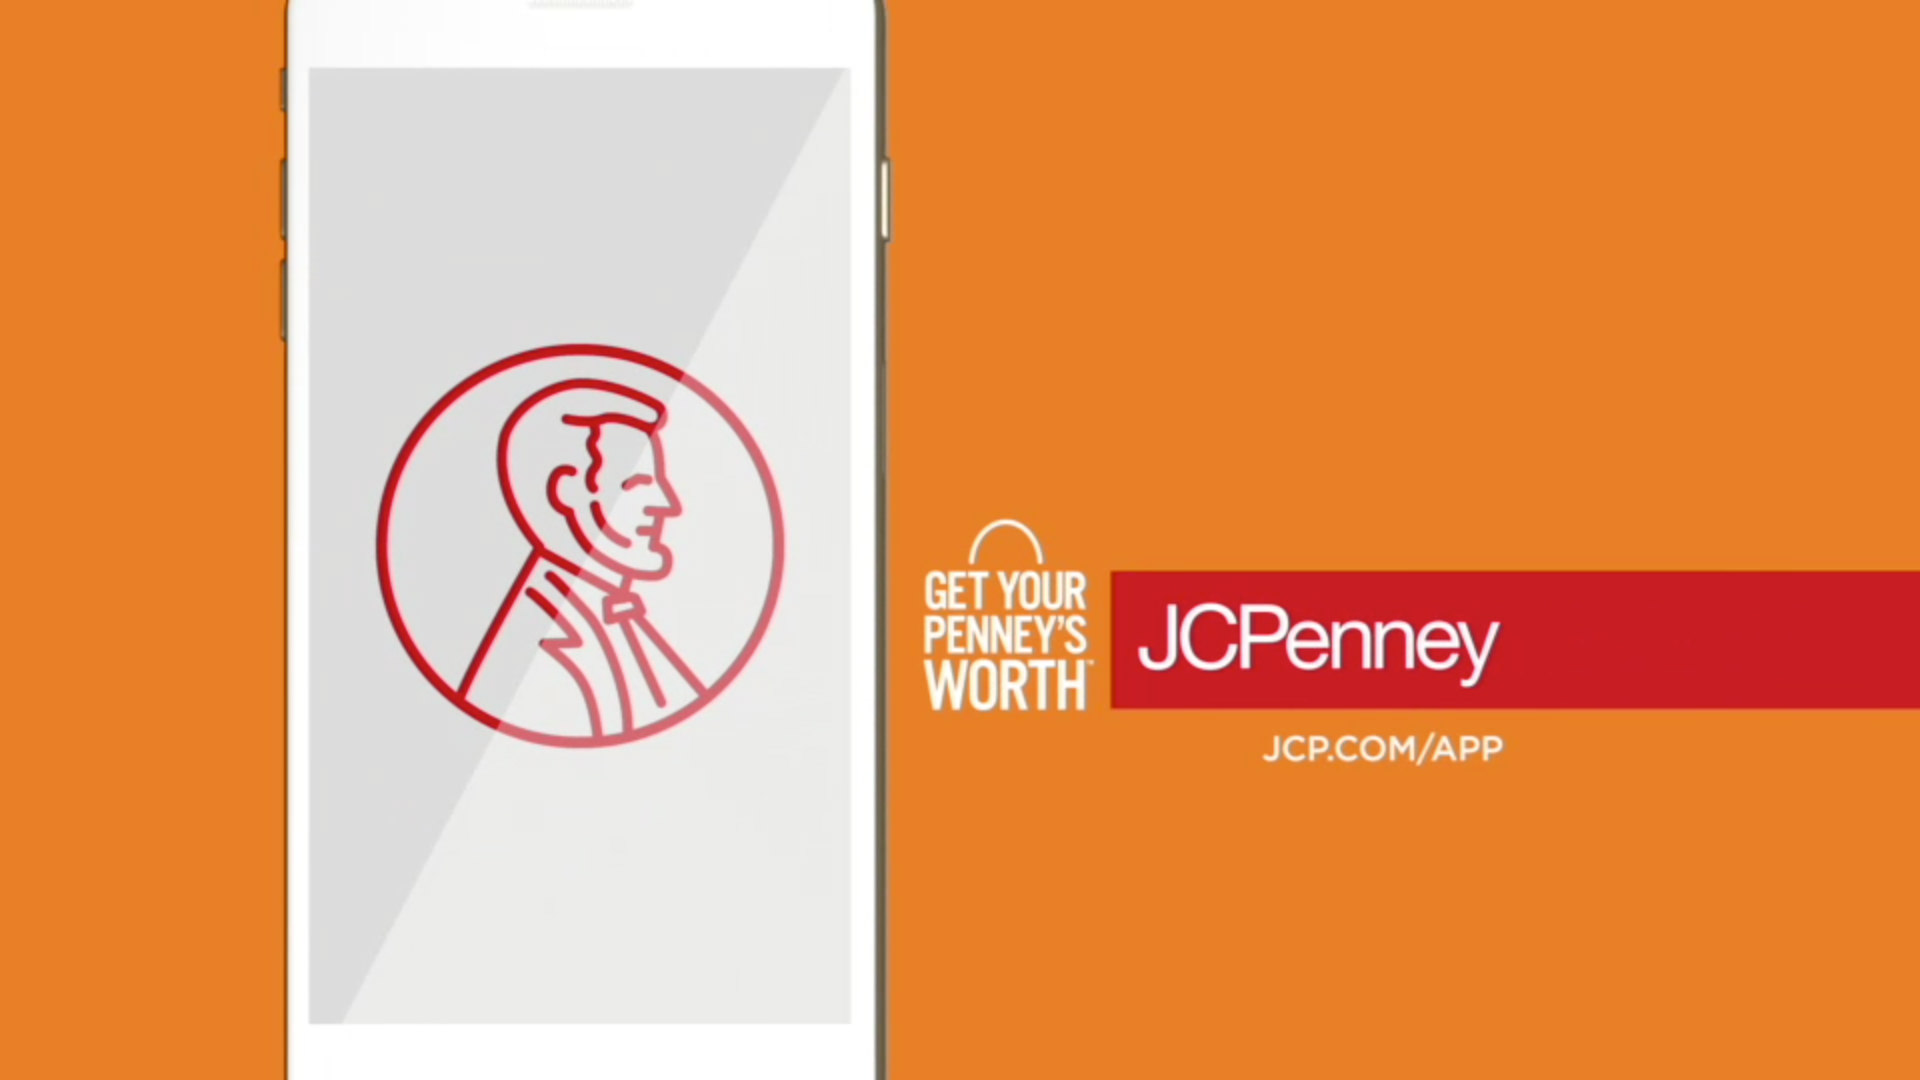 Digital Coupons for JCPenney - Apps on Google Play